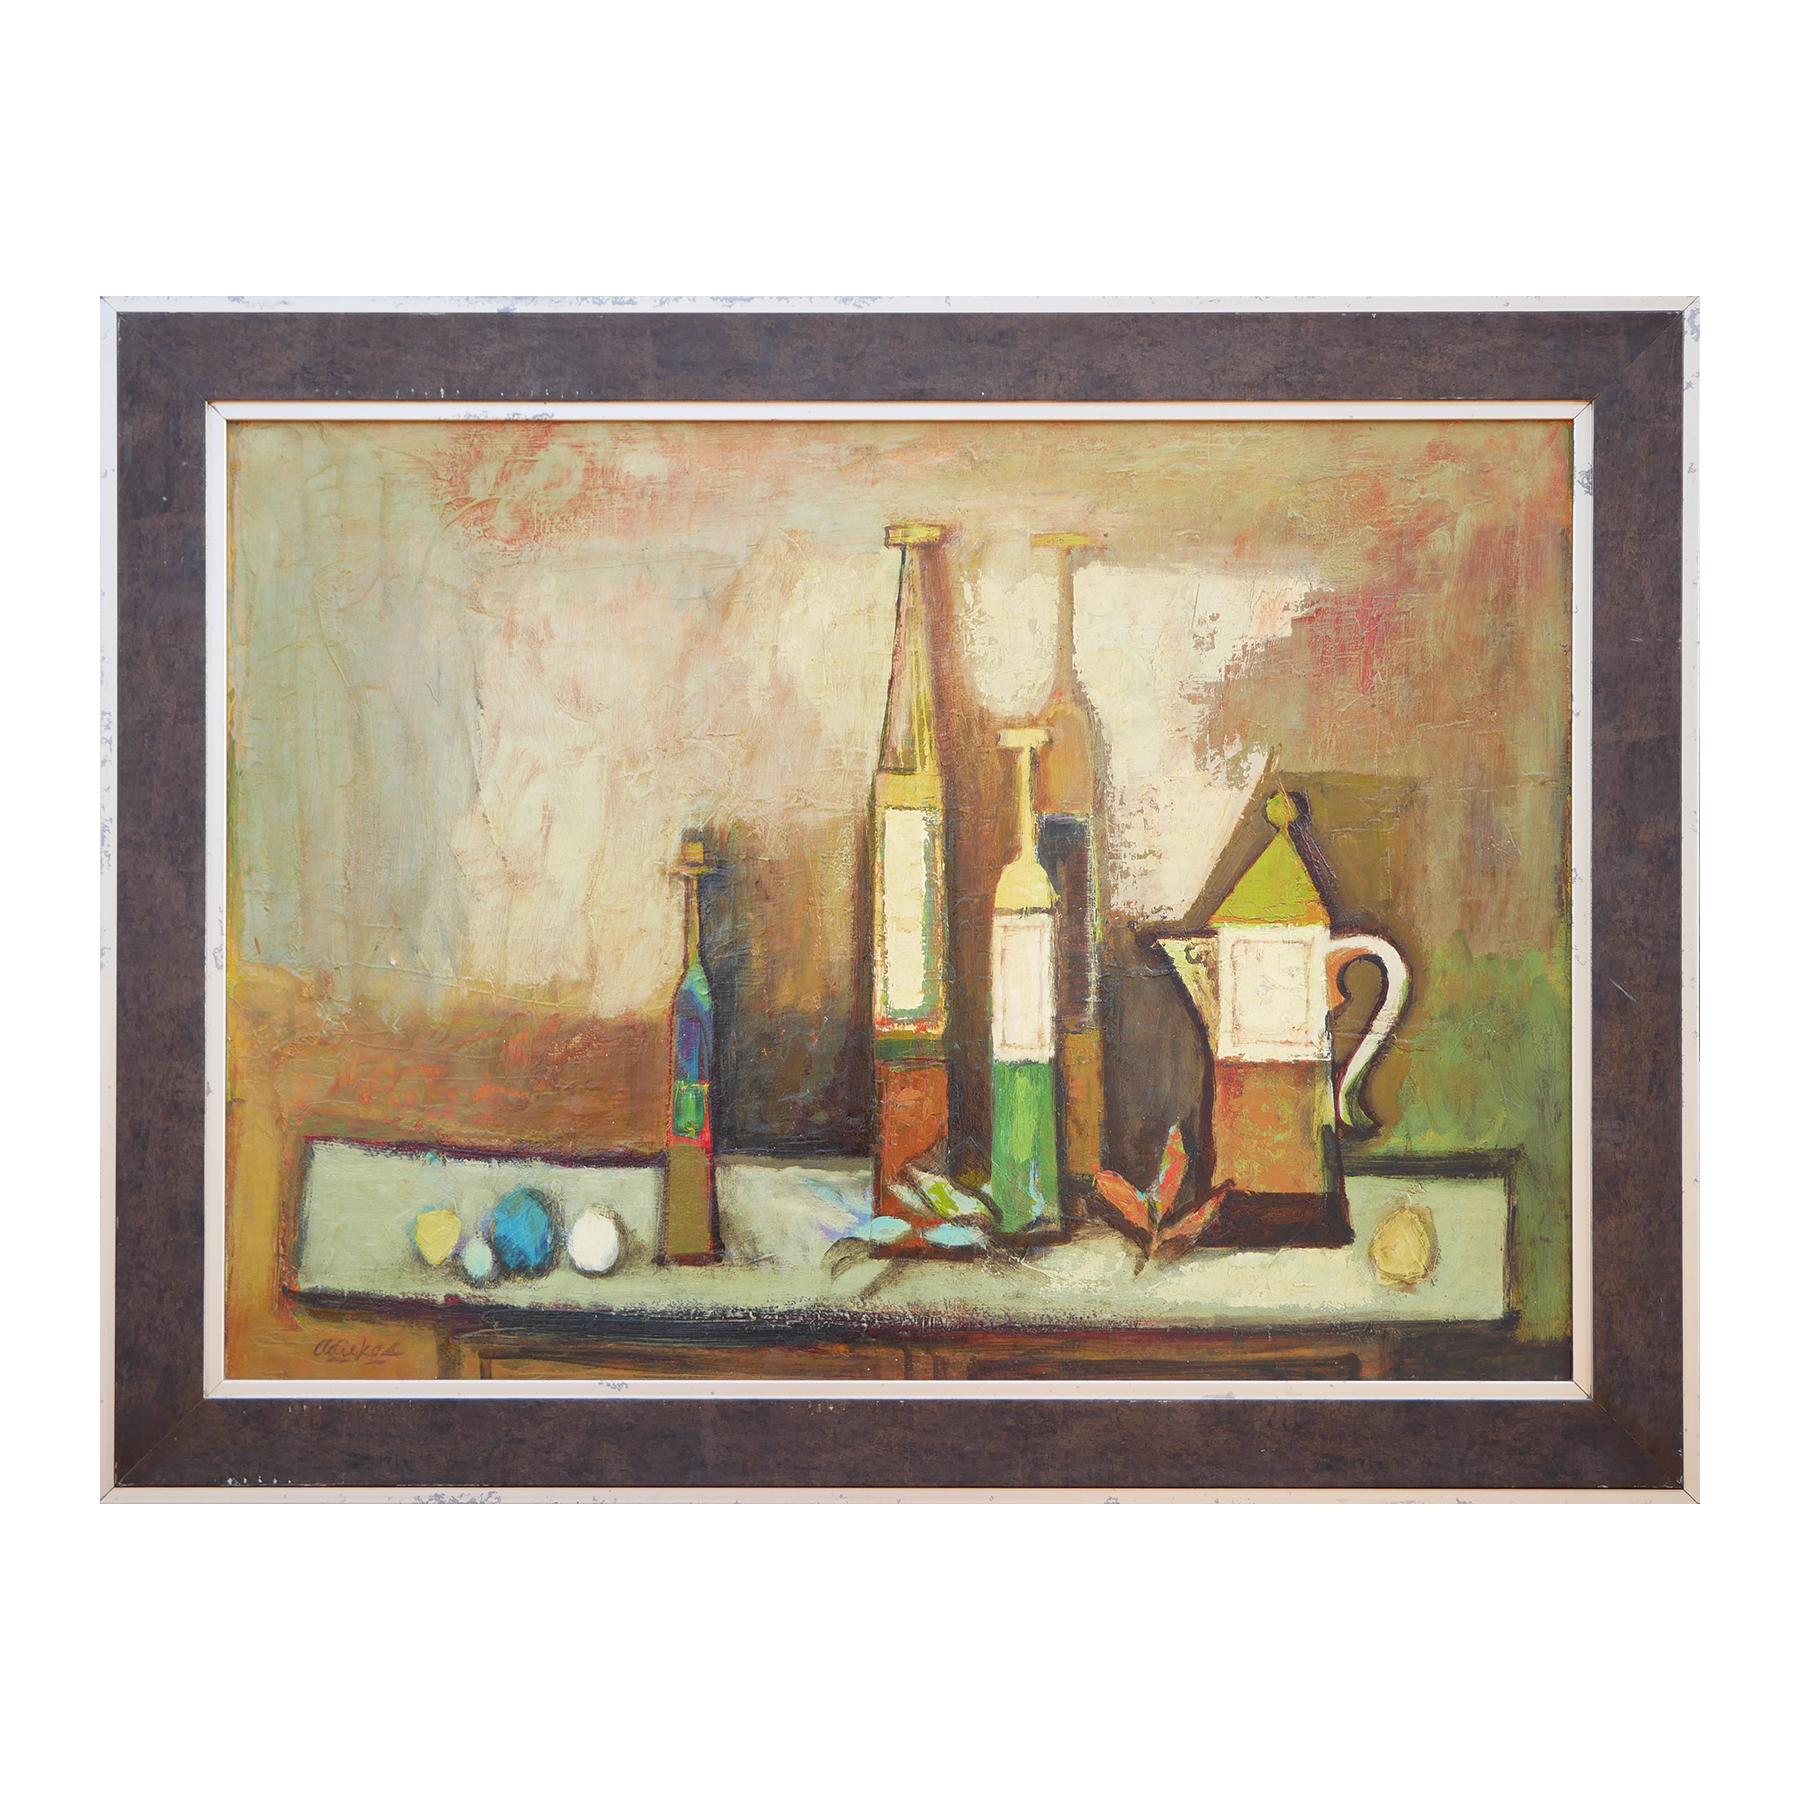 Modern abstract brown, green, and yellow toned still life by Houston, TX artist David Adickes. The work features a central arrangement of bottles and a coffee pot set against a neutral background. Currently hung a complementary brown and silver